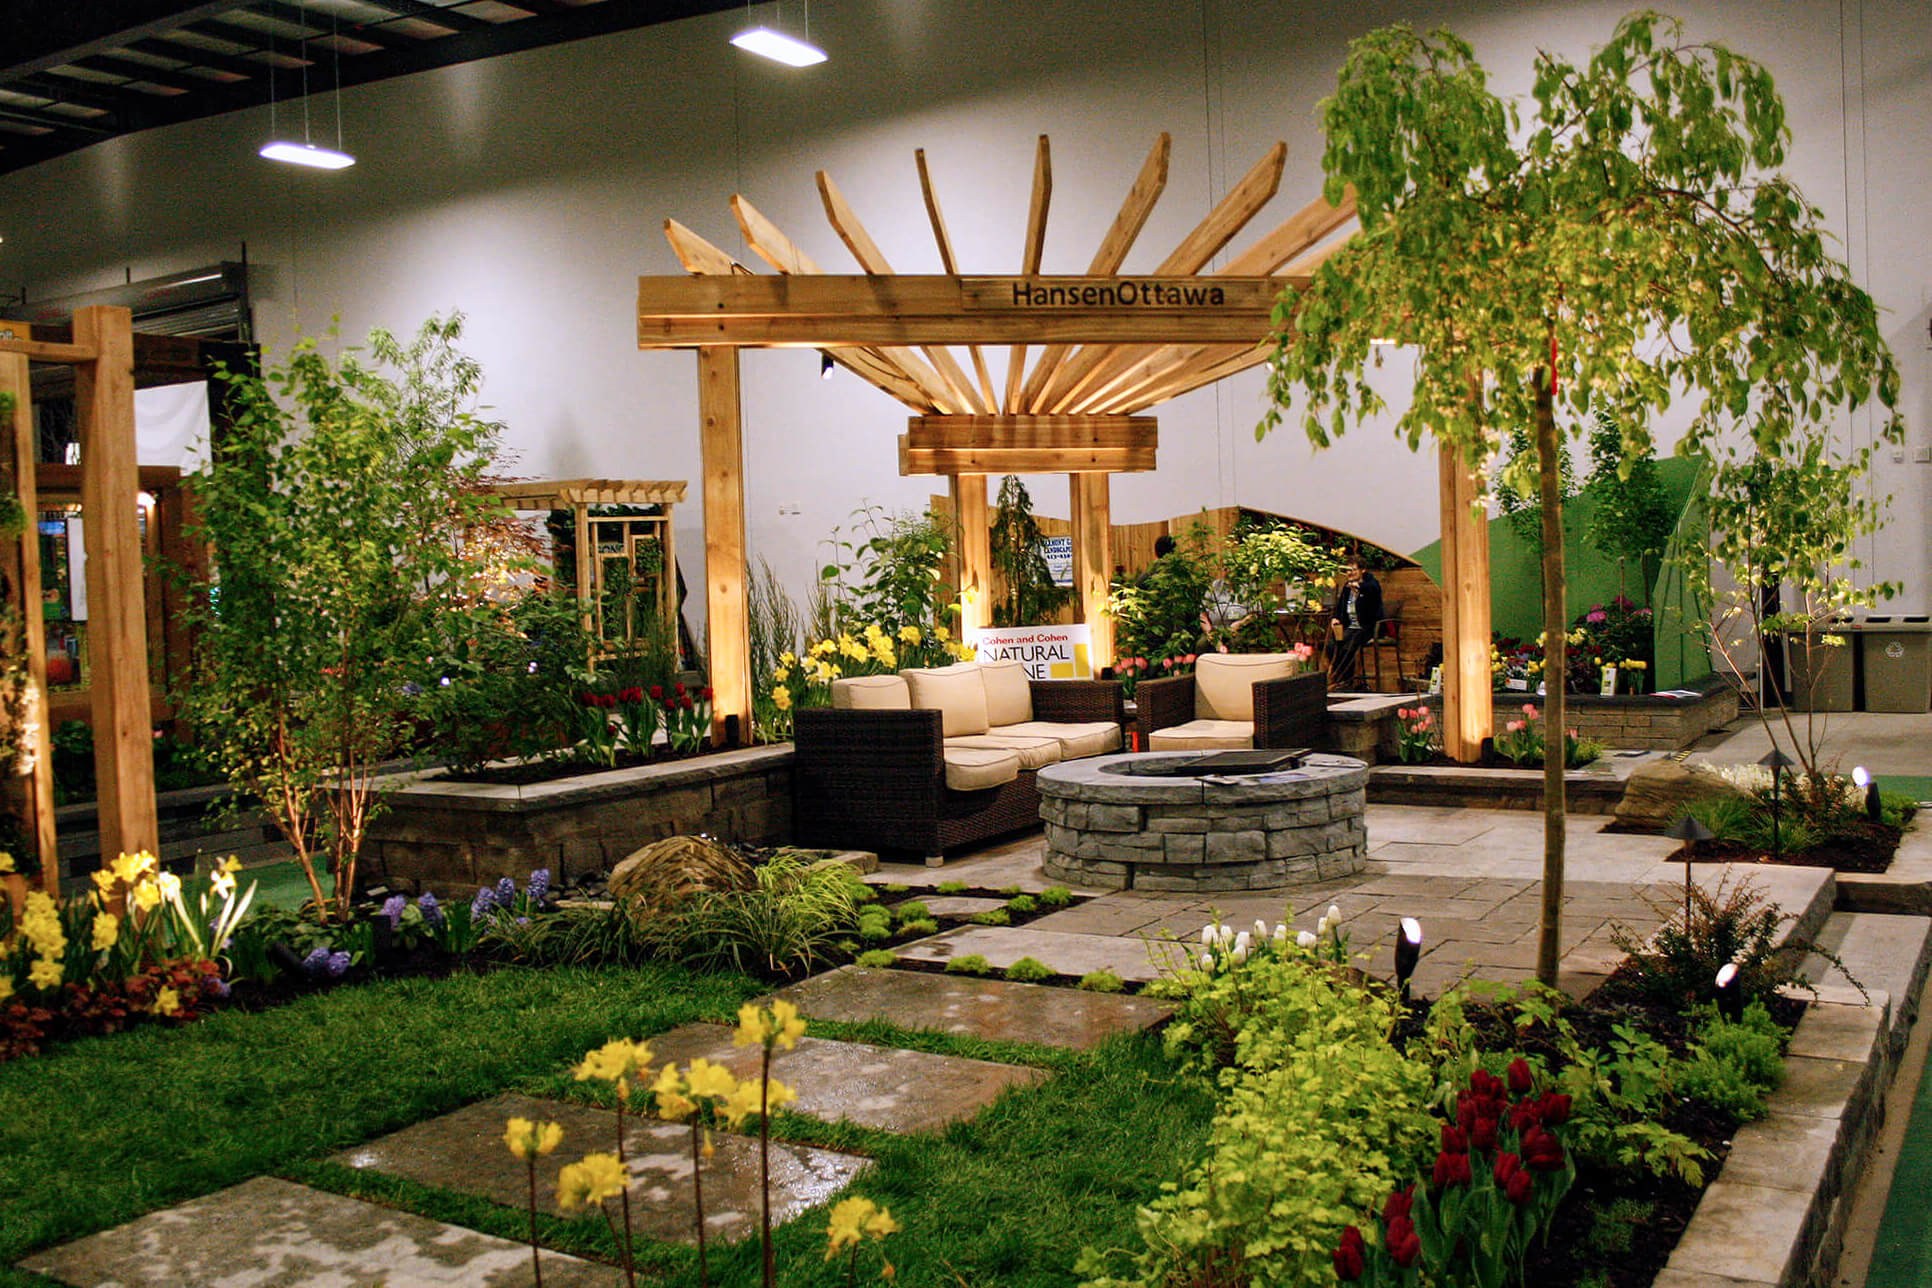 feature garden at a home show